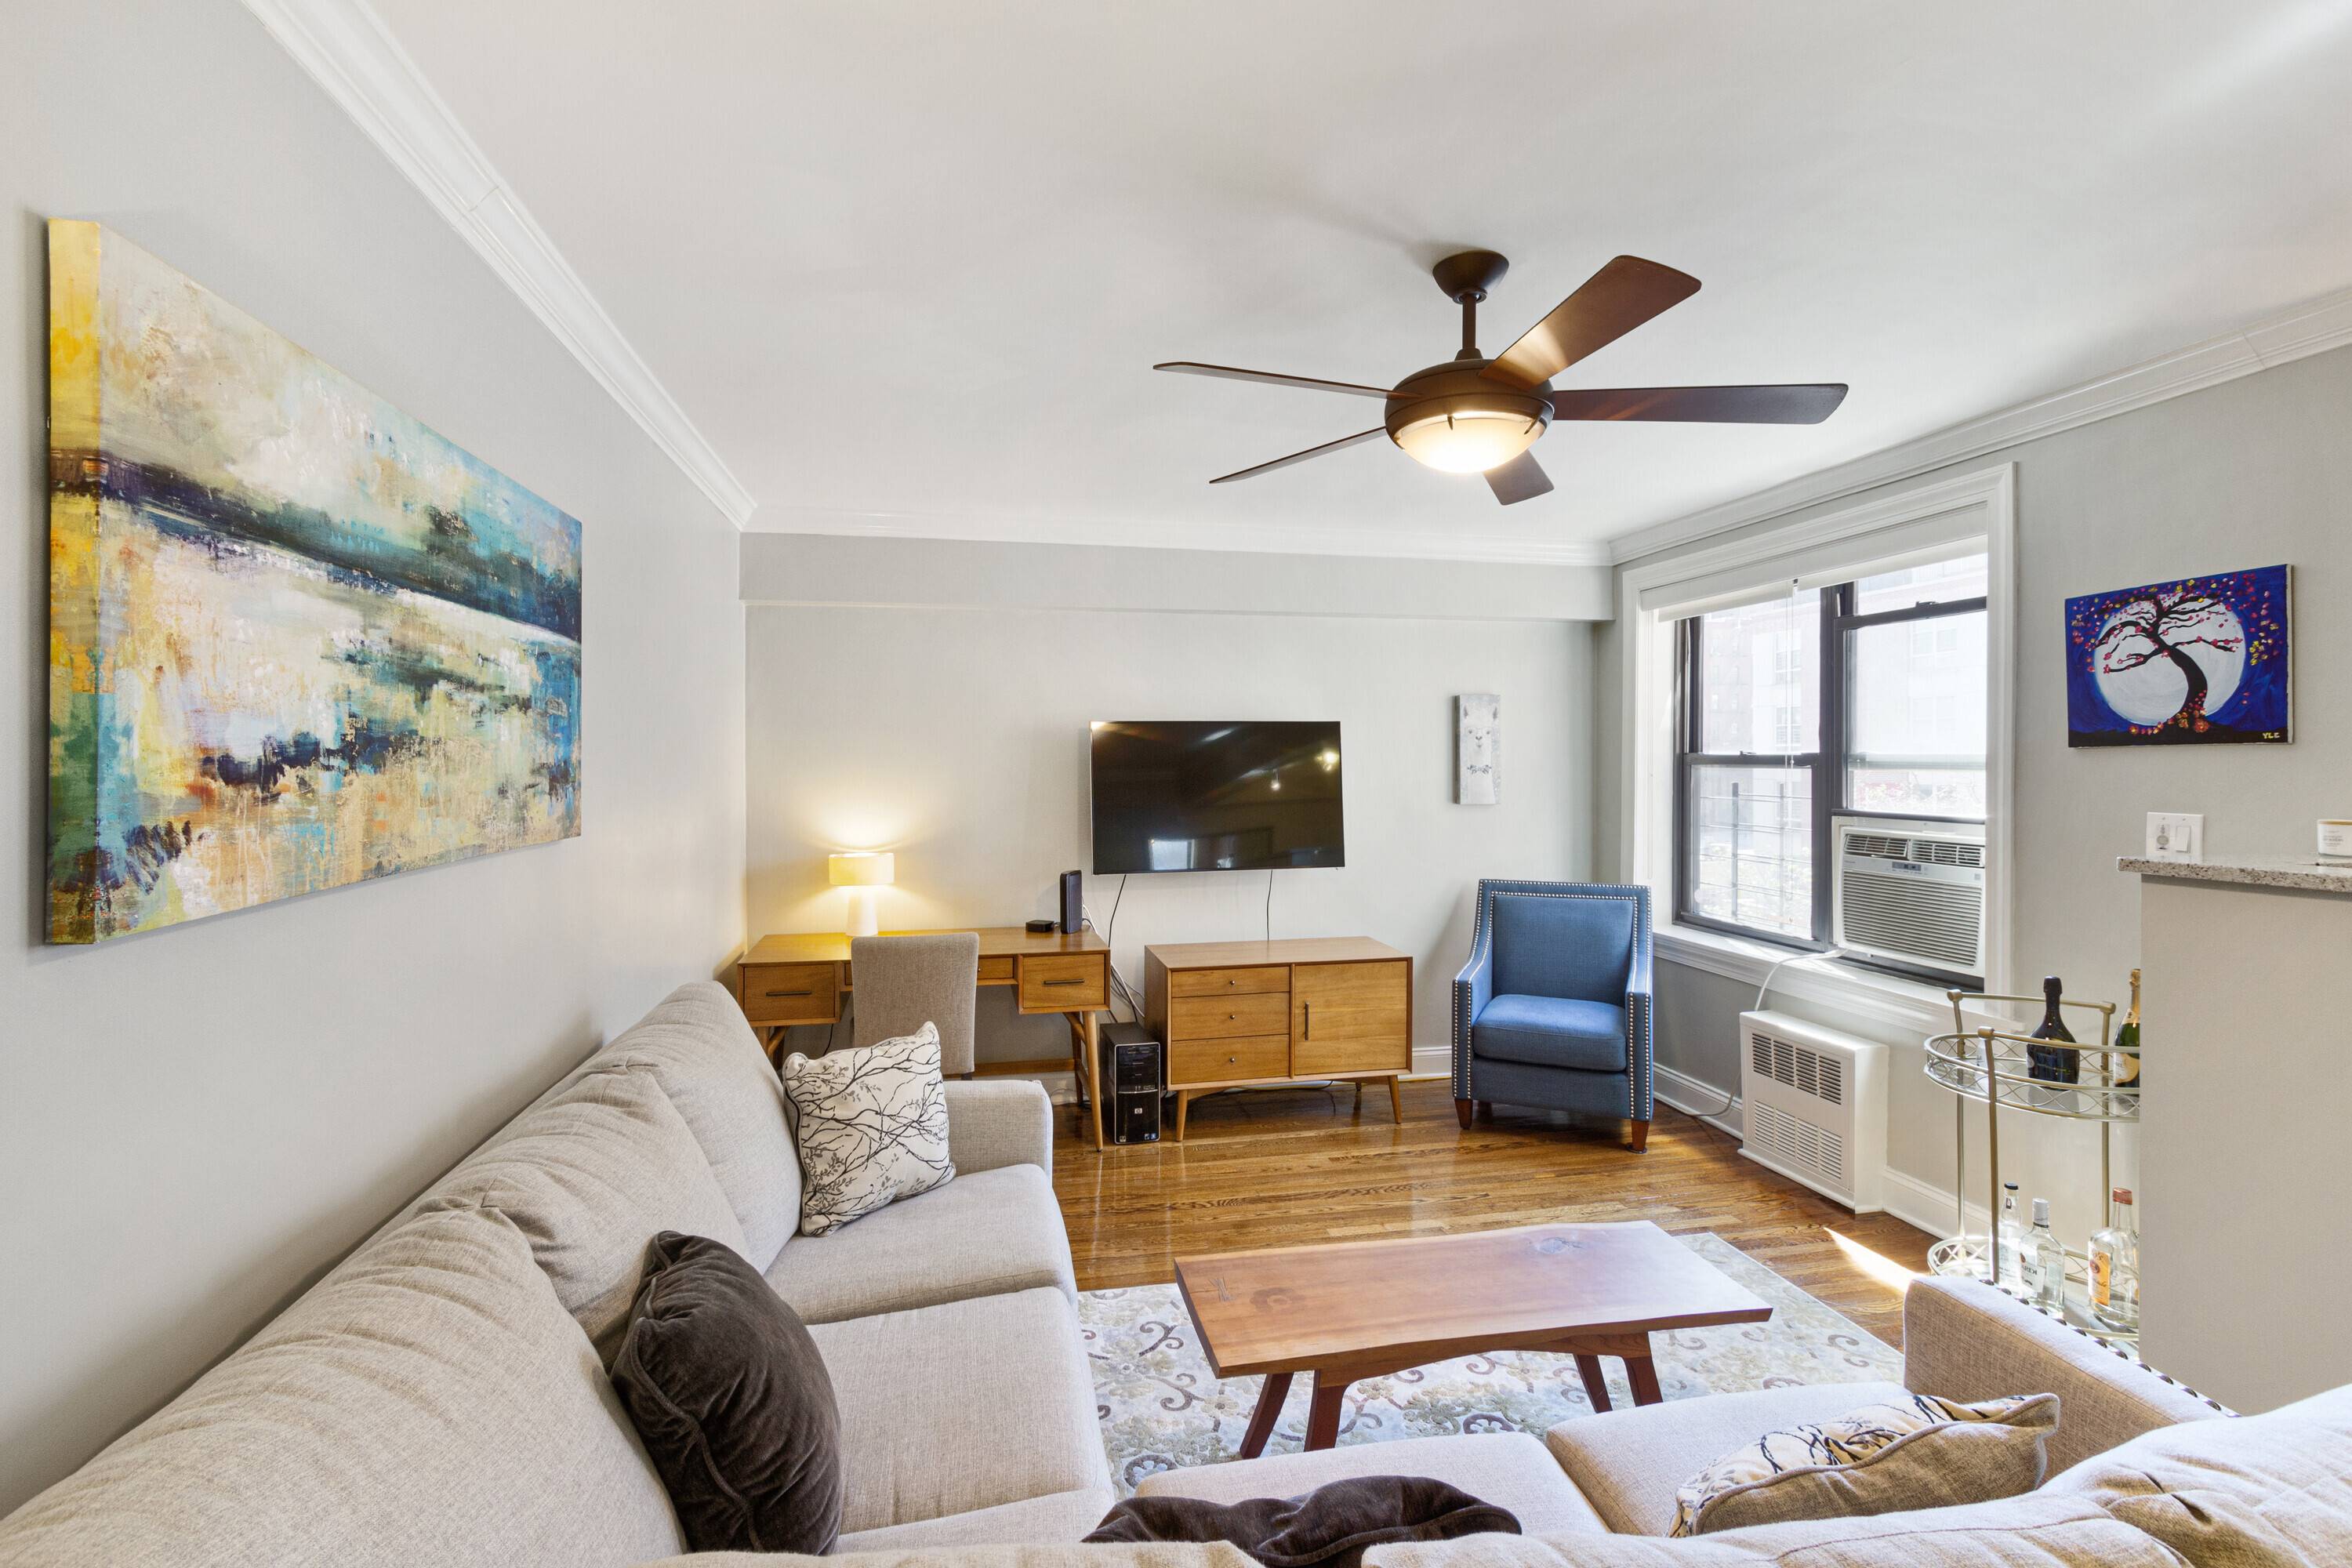 Let the sunshine in ! Southern and eastern exposure assure a bright and cheerful setting for your comfortable two bedroom home.